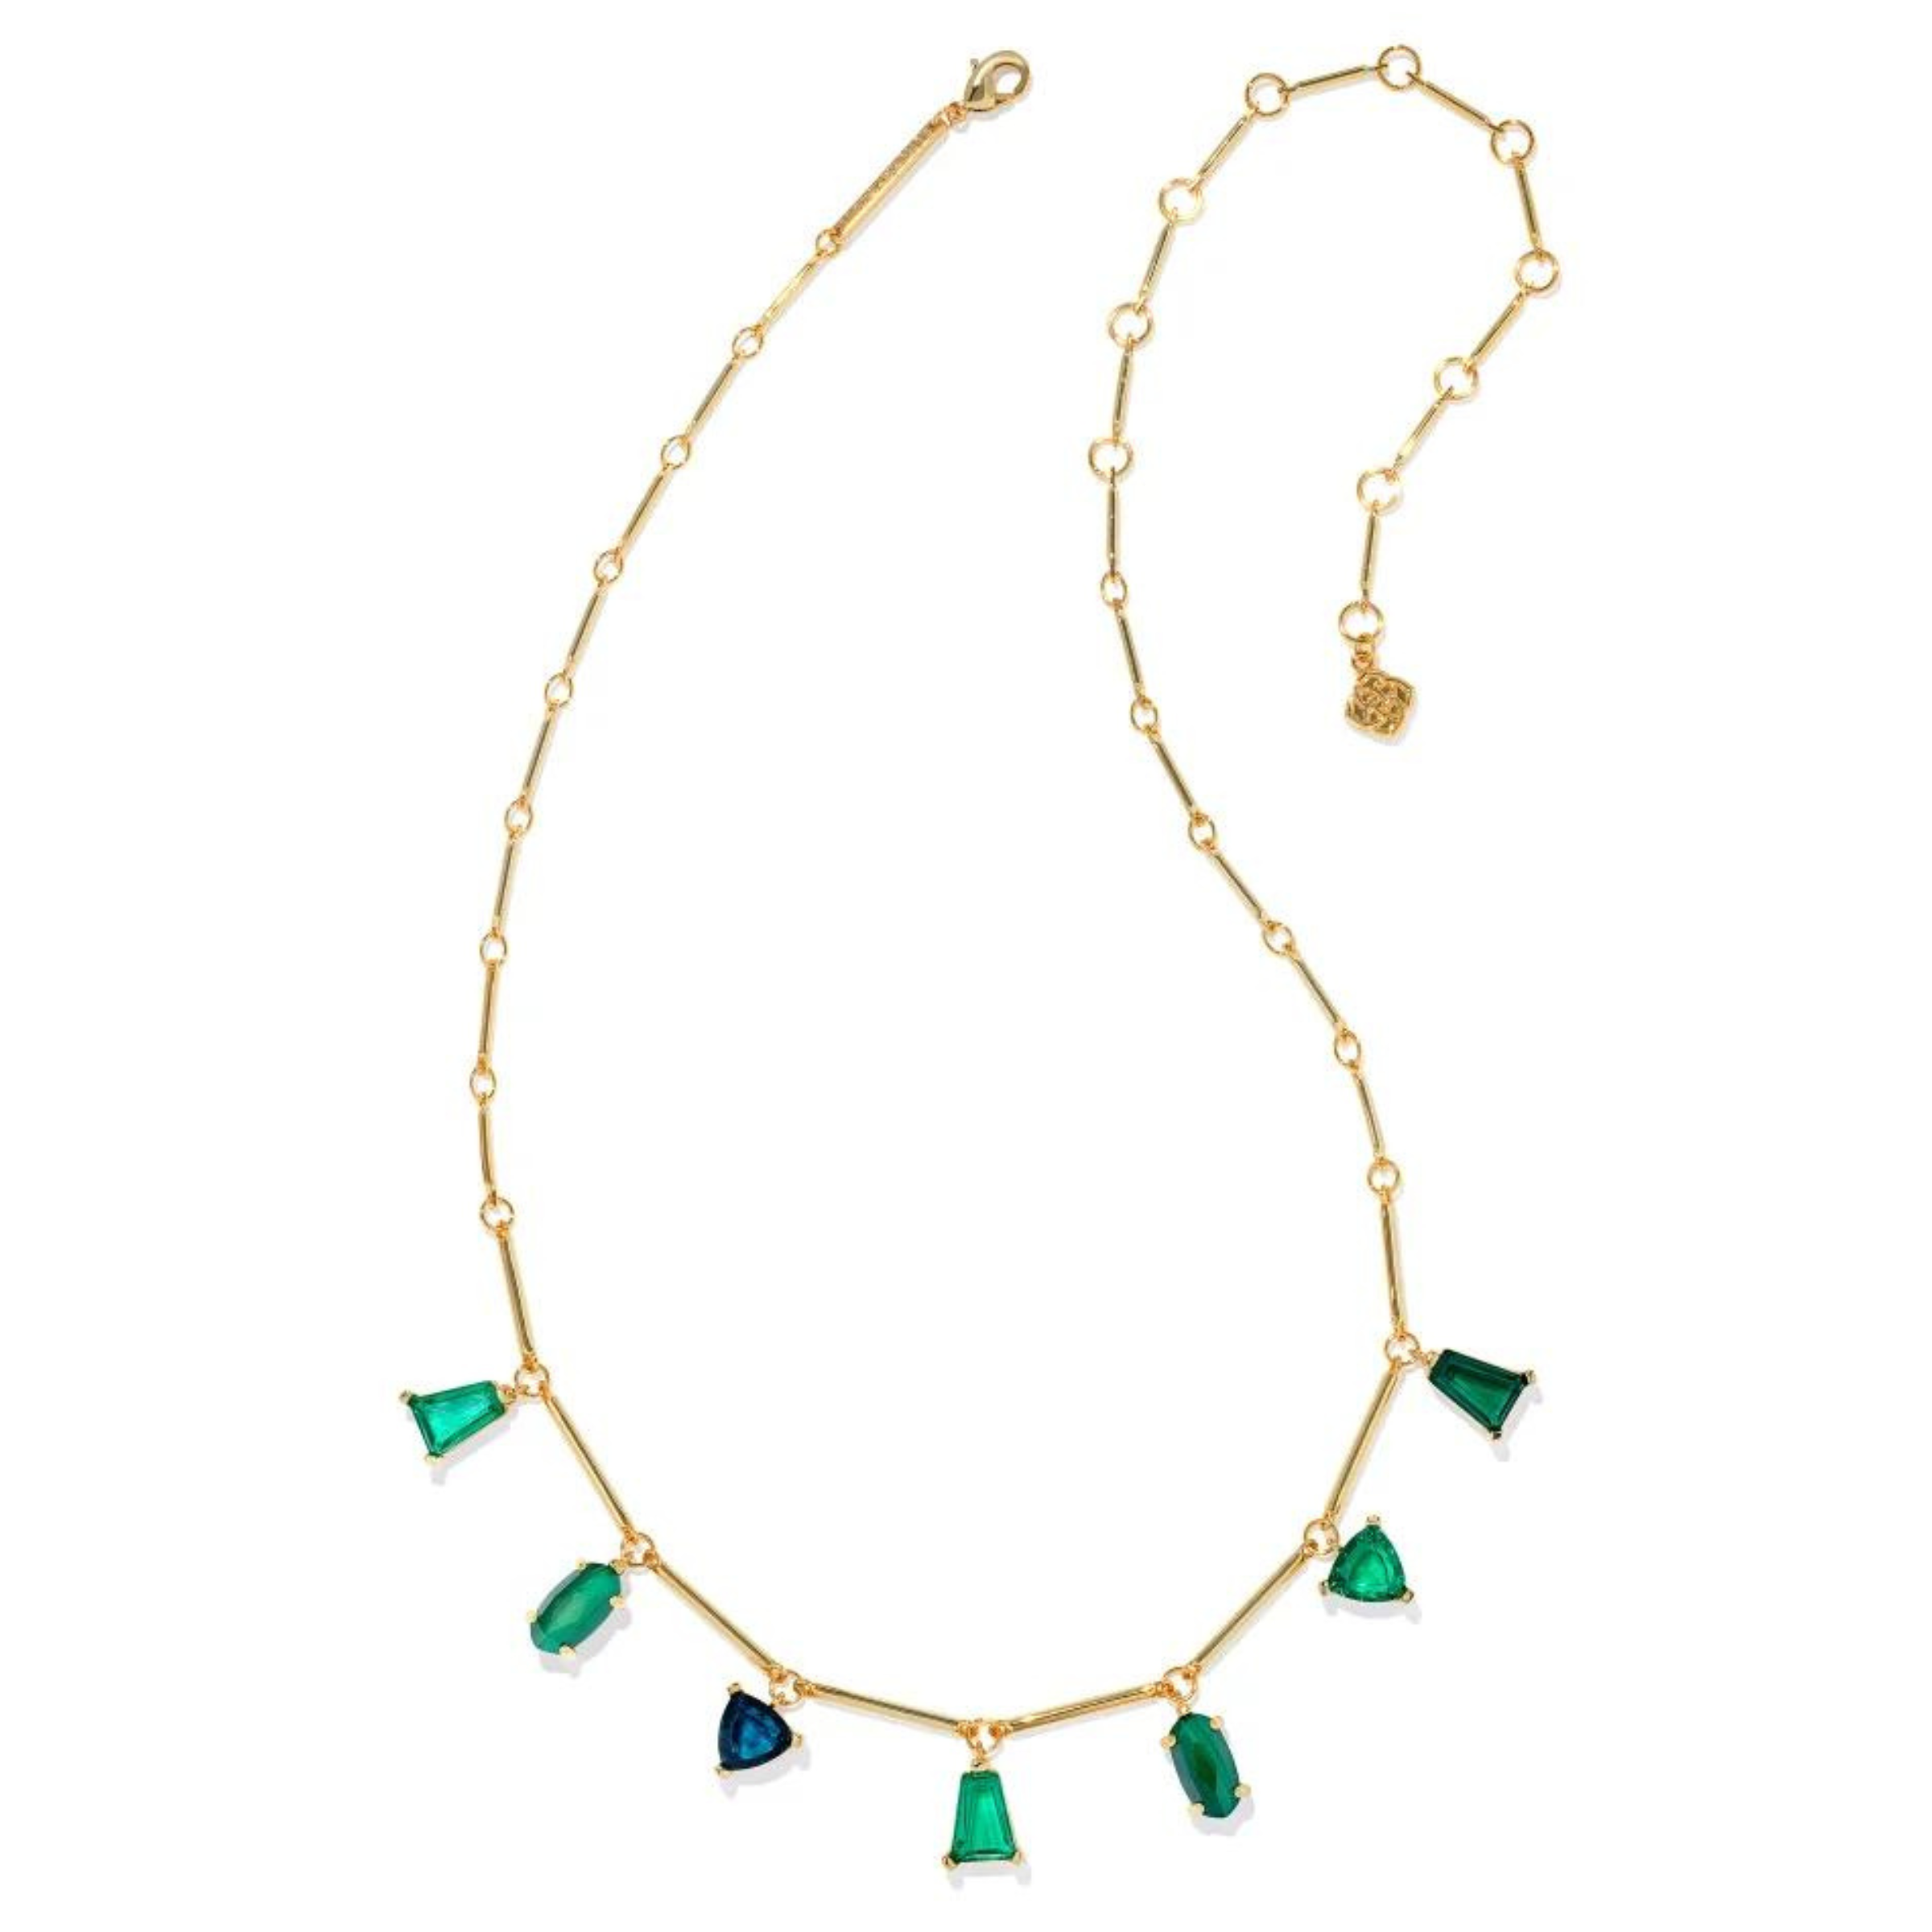 Gold chain necklace with emerald crystal charms in different shapes. This necklace is pictured on a white background. 